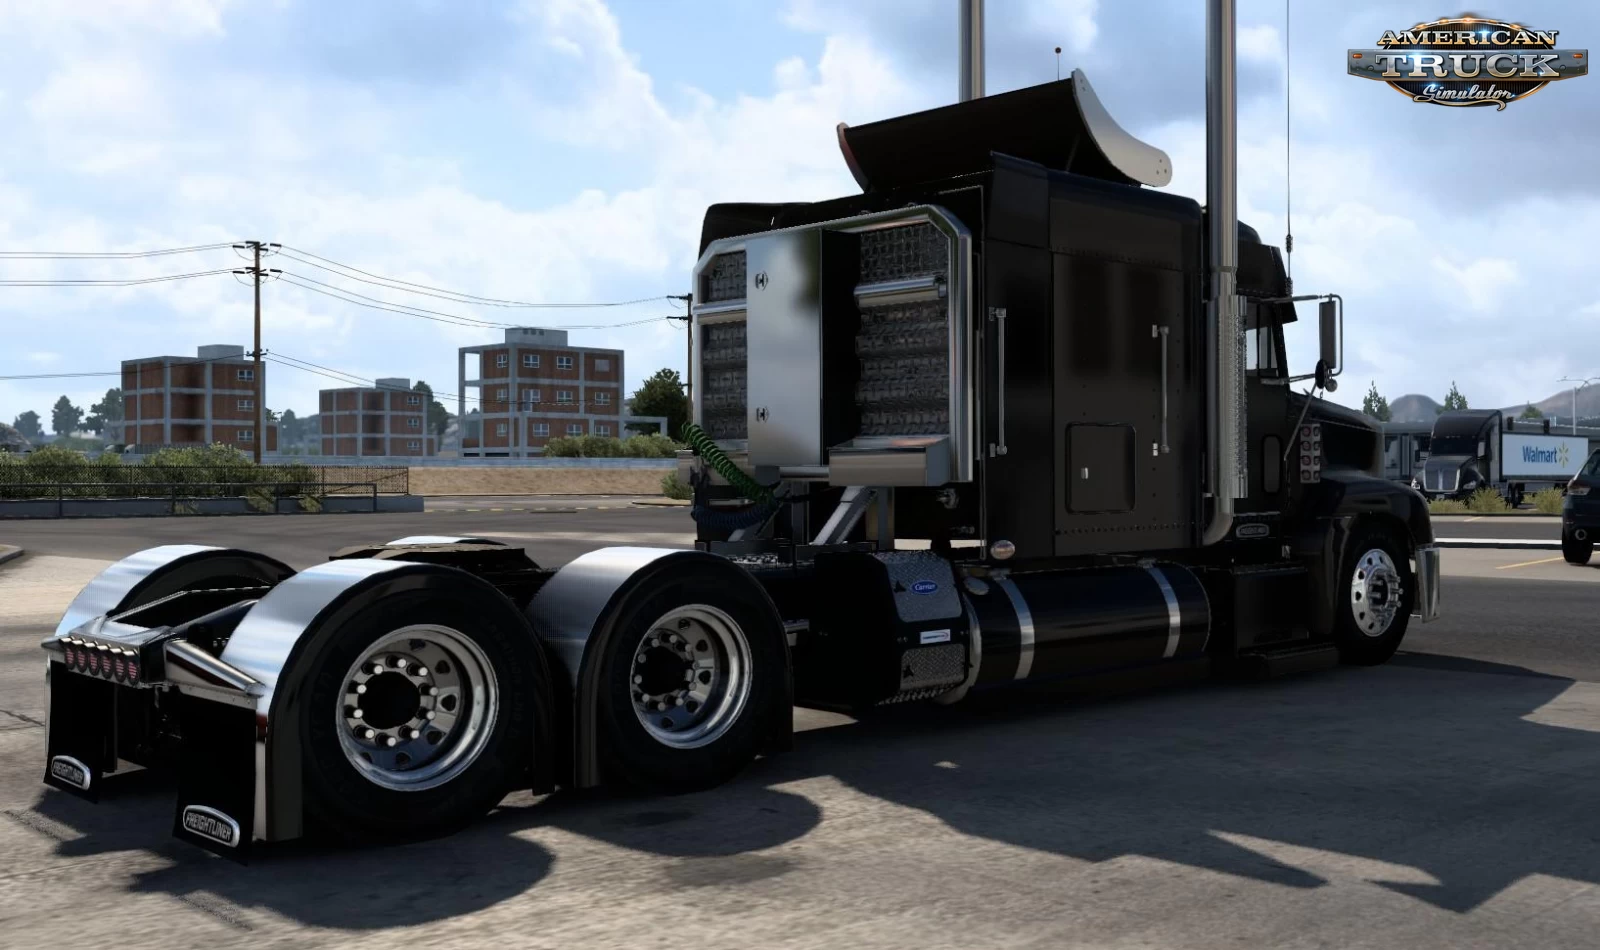 Freightliner FLD Custom v1.8 by ReneNate (1.46.x) for ATS